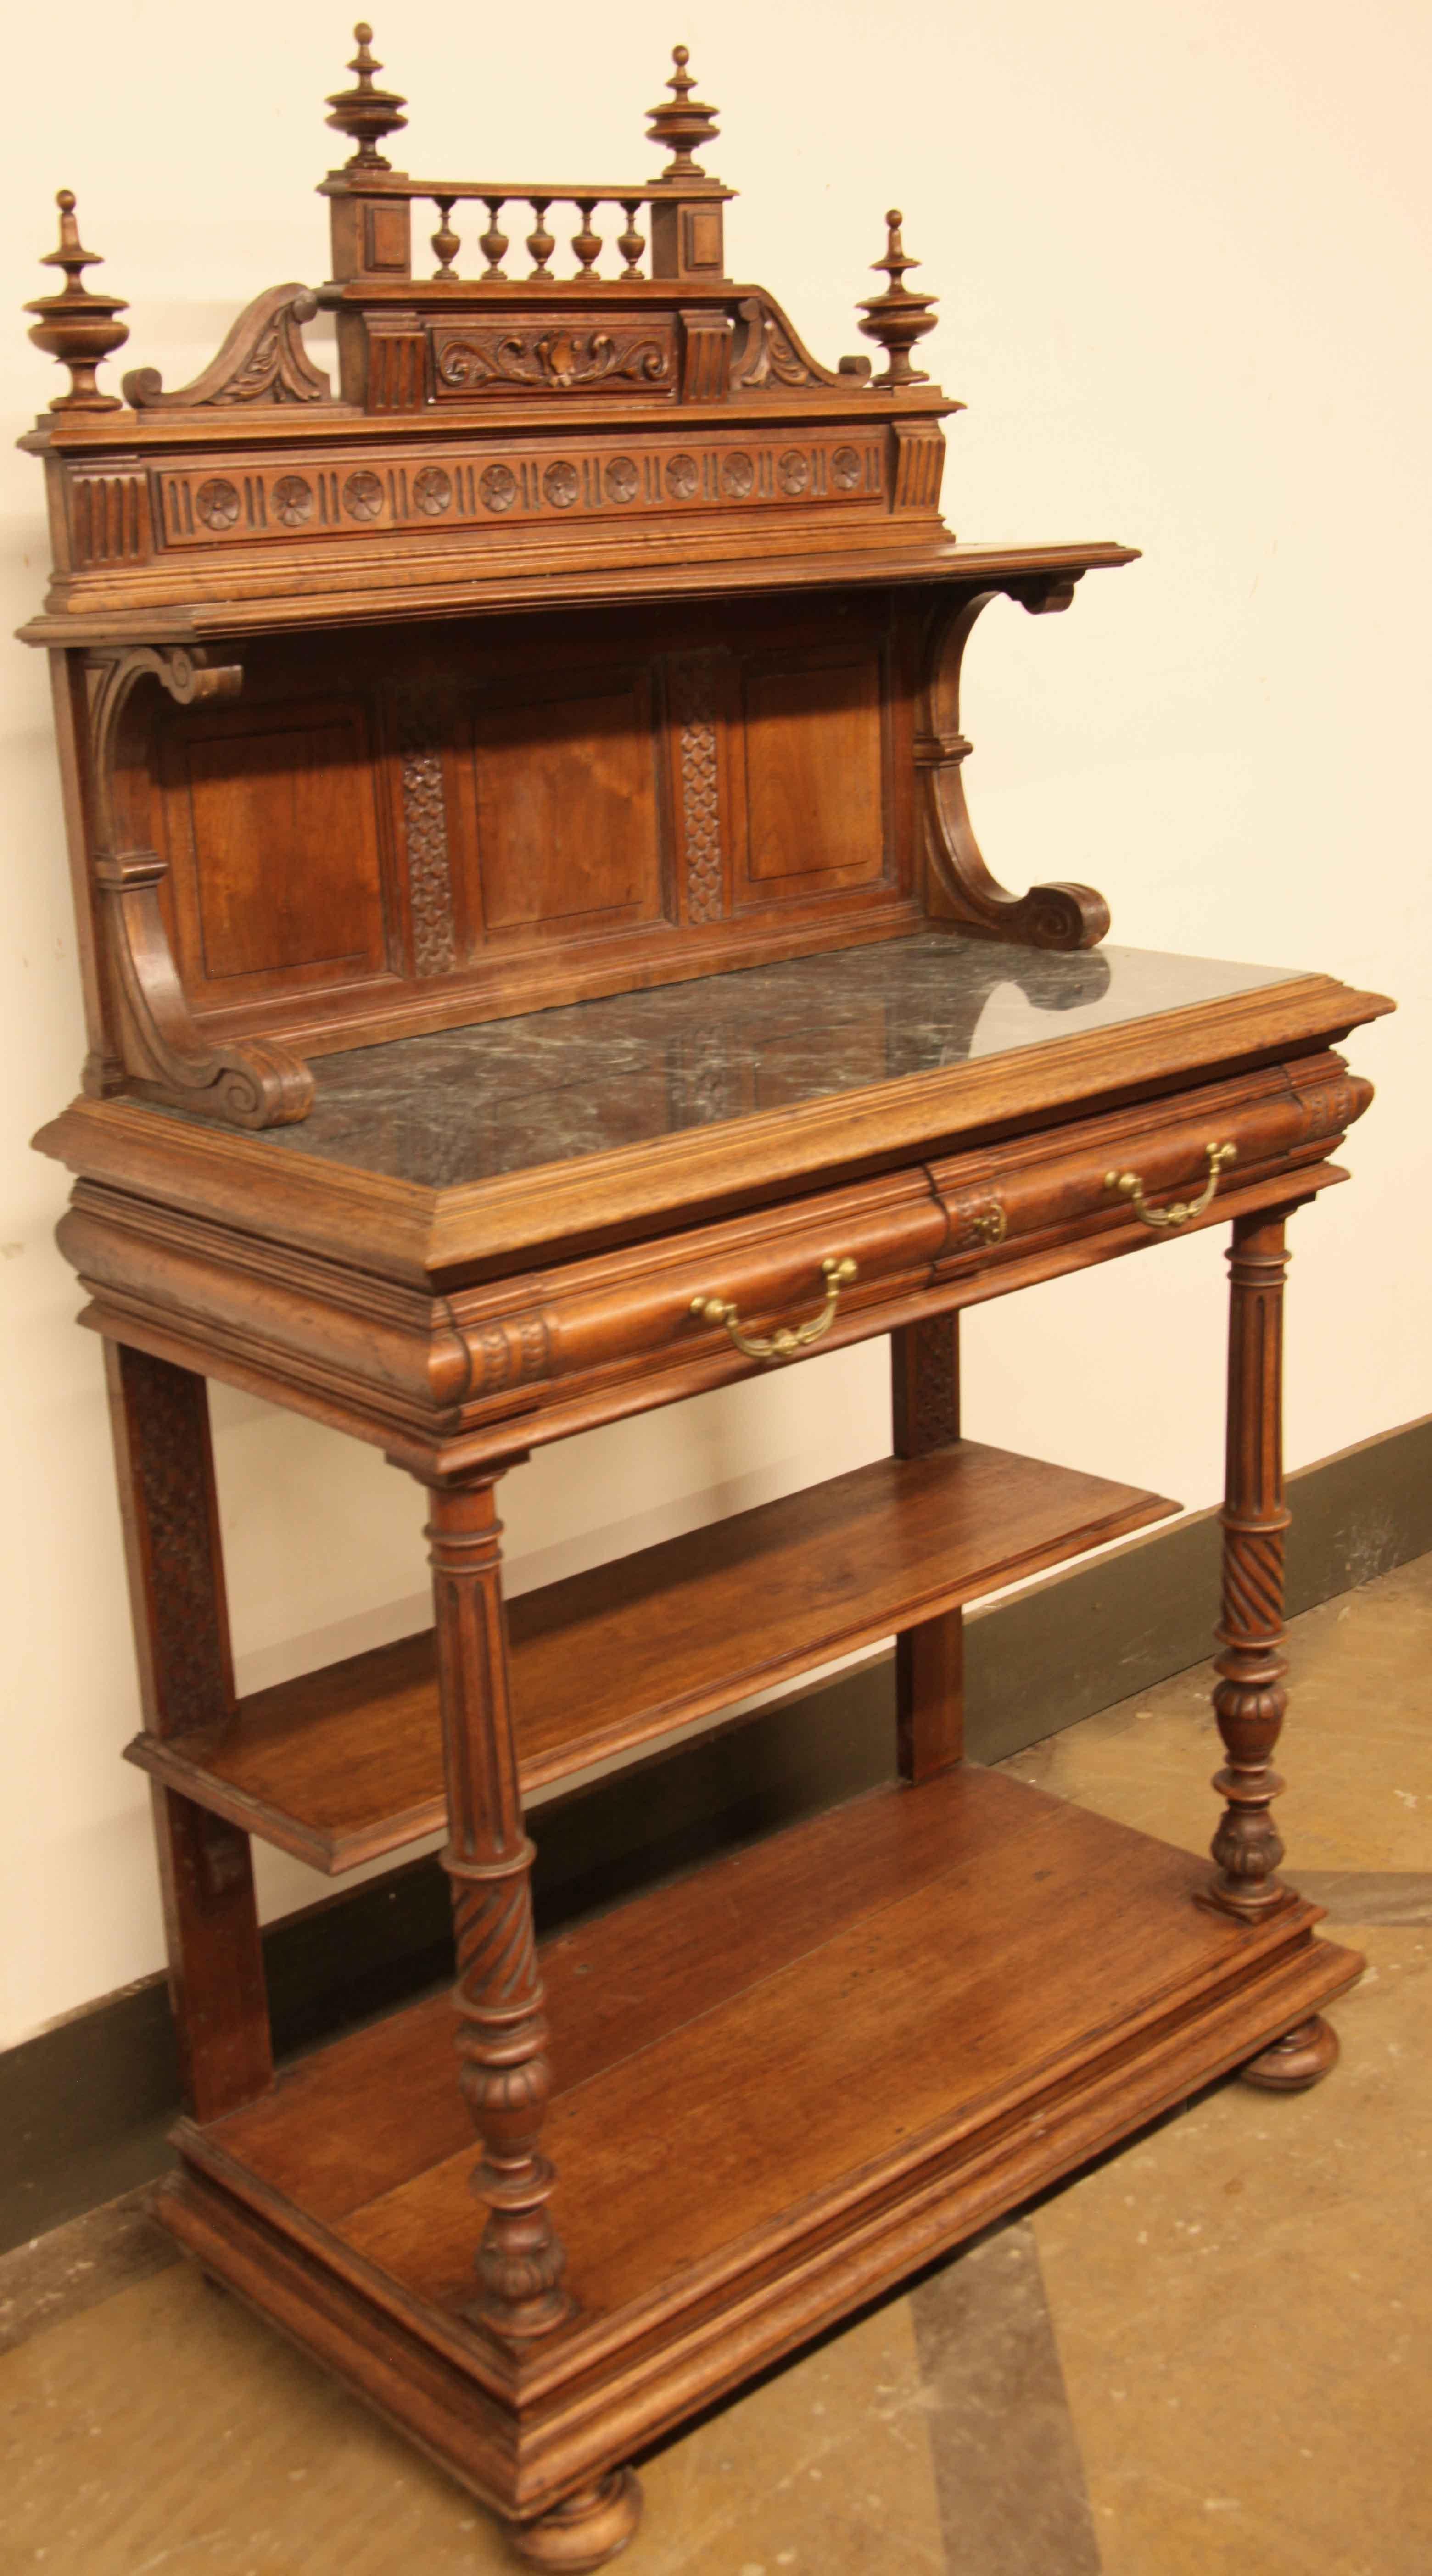 Carved walnut marble top sideboard, the back gallery features pediment with four turned finials and spindles above cartouche with shield, arabesques and stippling, followed by a horizontal row of carved rosettes and 9'' deep shelf.  Below this are